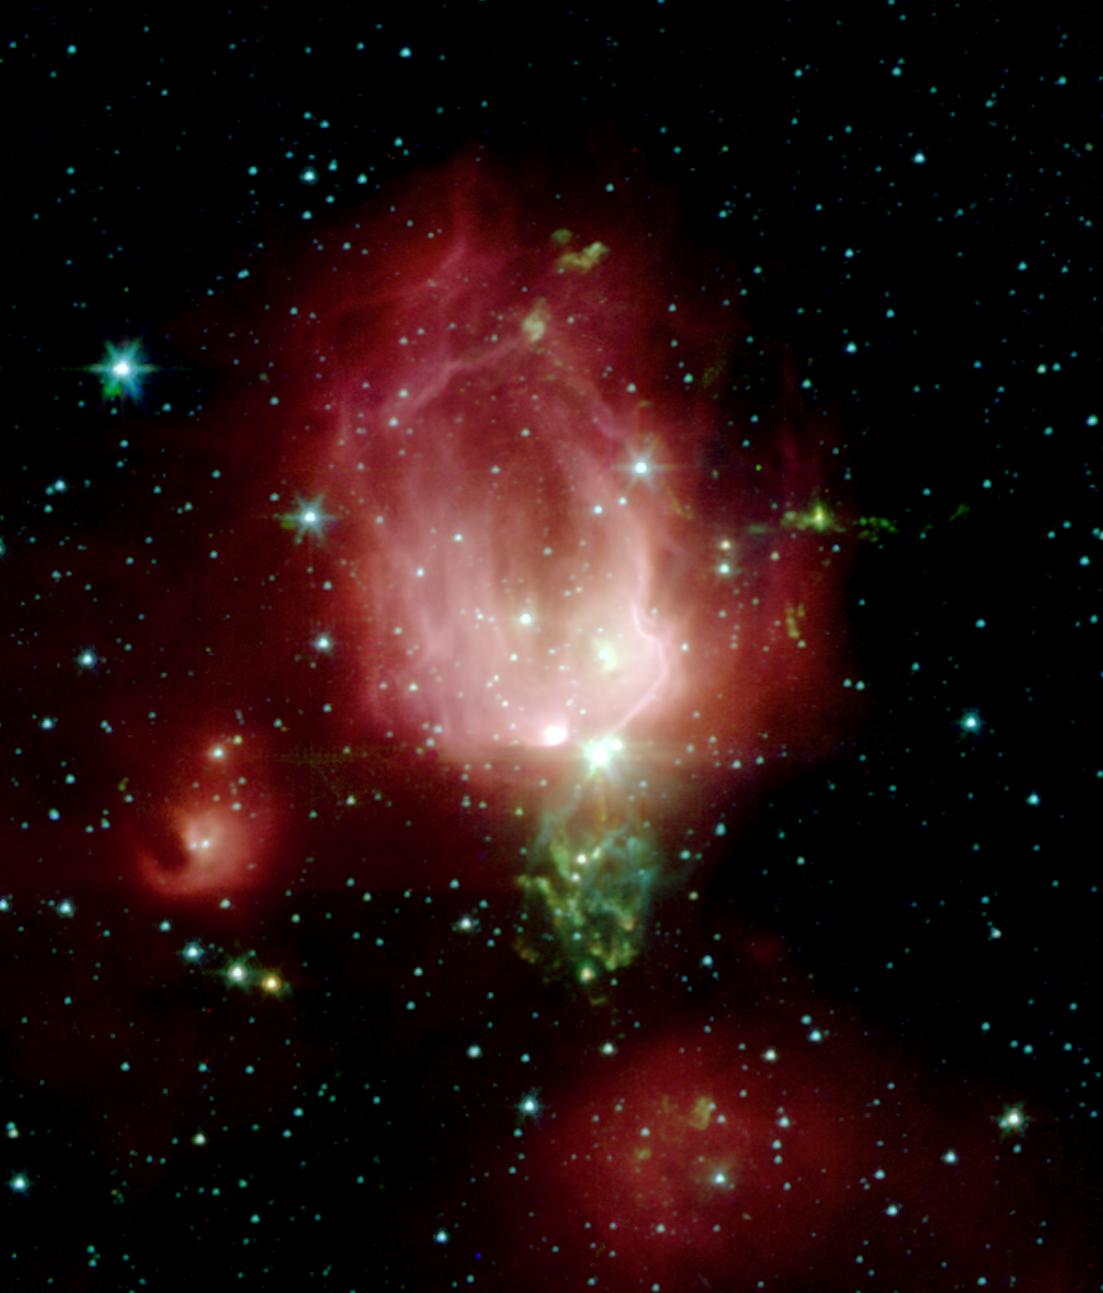 Feast your eyes on this cosmic rose plucked by NASA's Spitzer Space Telescope